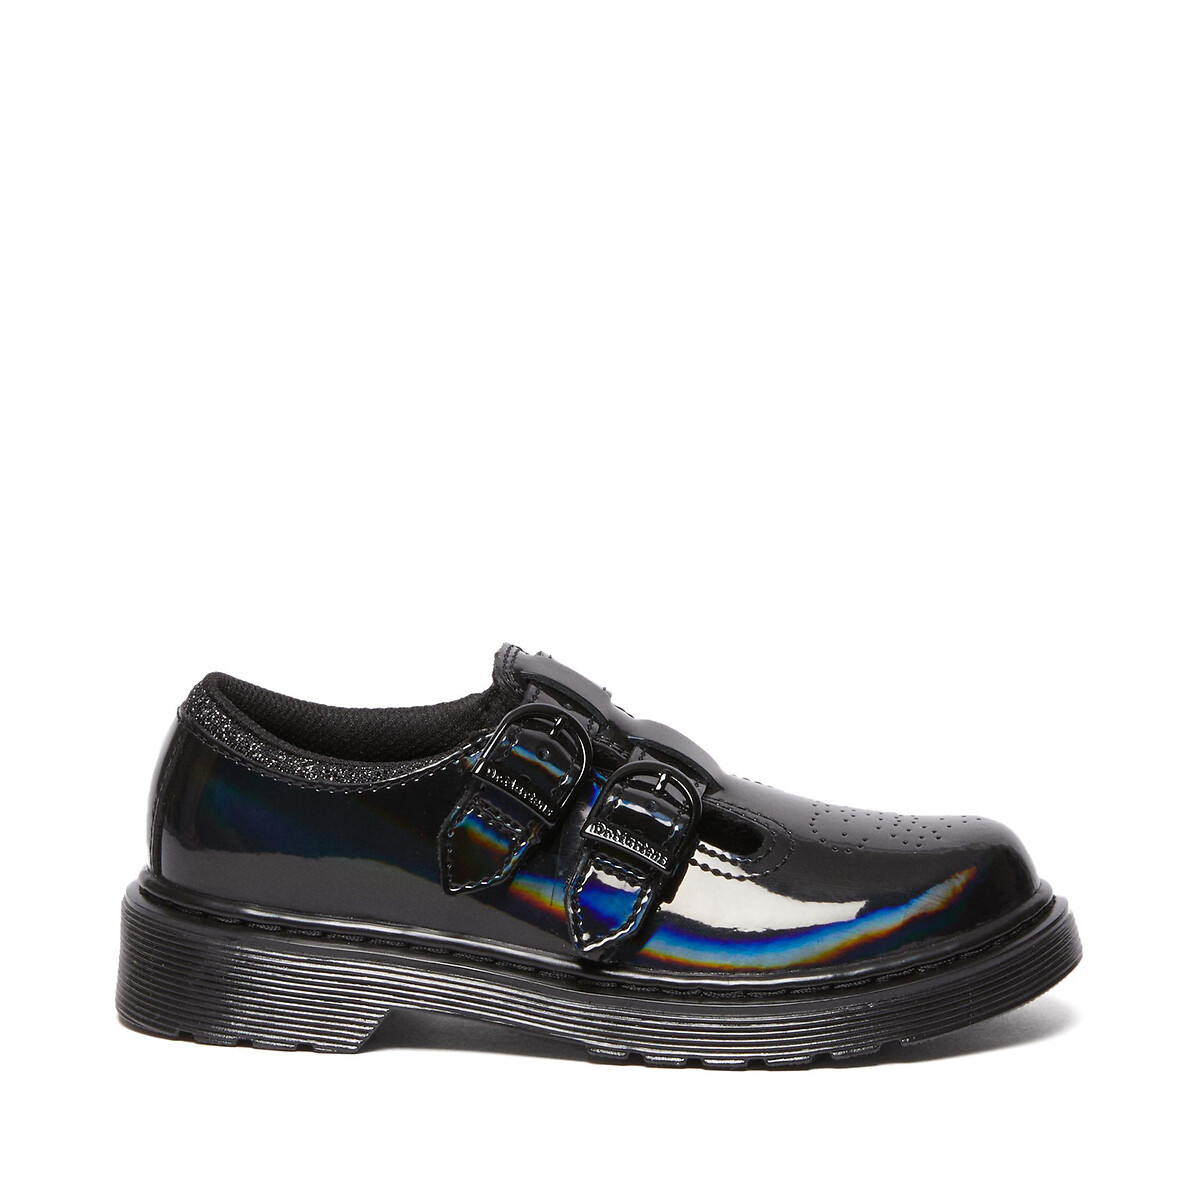 Kids 8065 J Mary Janes in Patent Leather